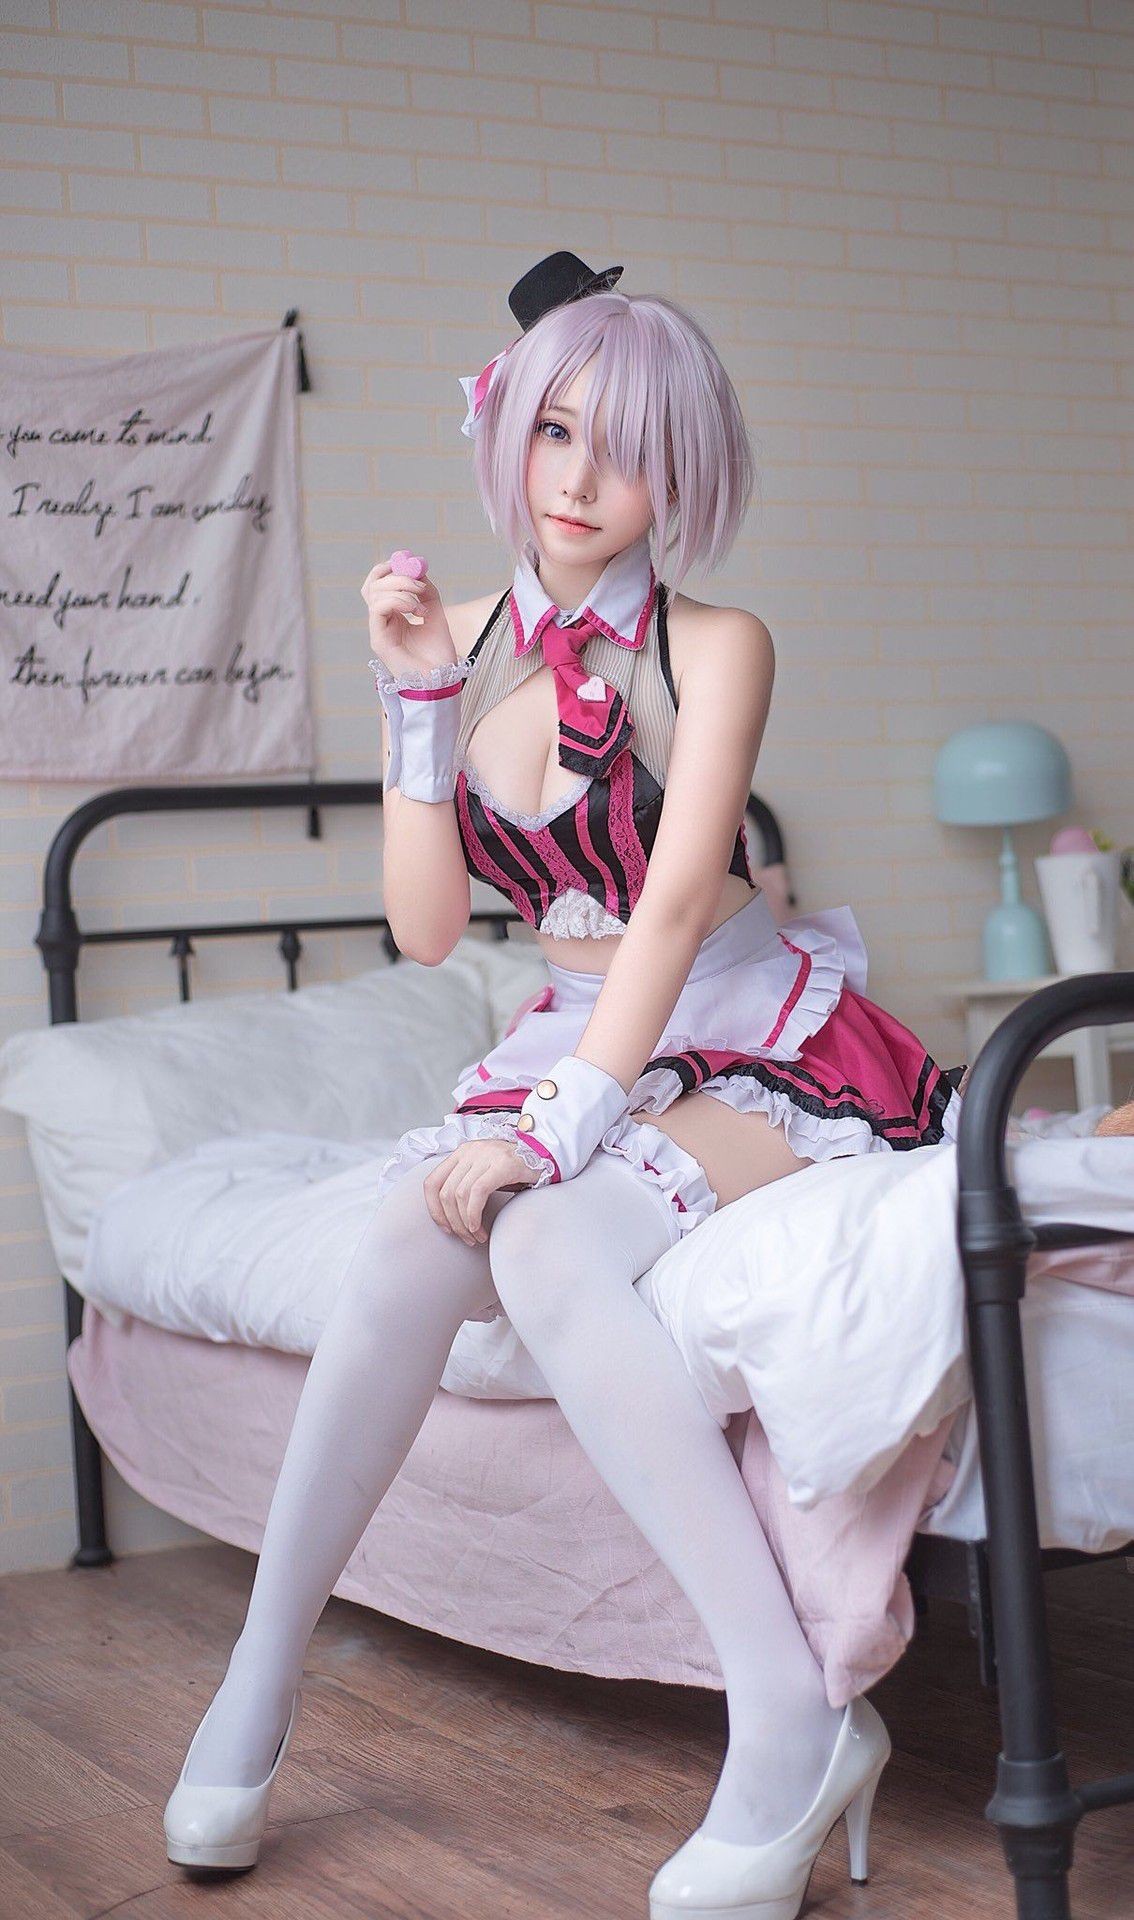 Prostitute [with Image] 16-year-old Cosplayers, Wwwwwww Too Assfingering